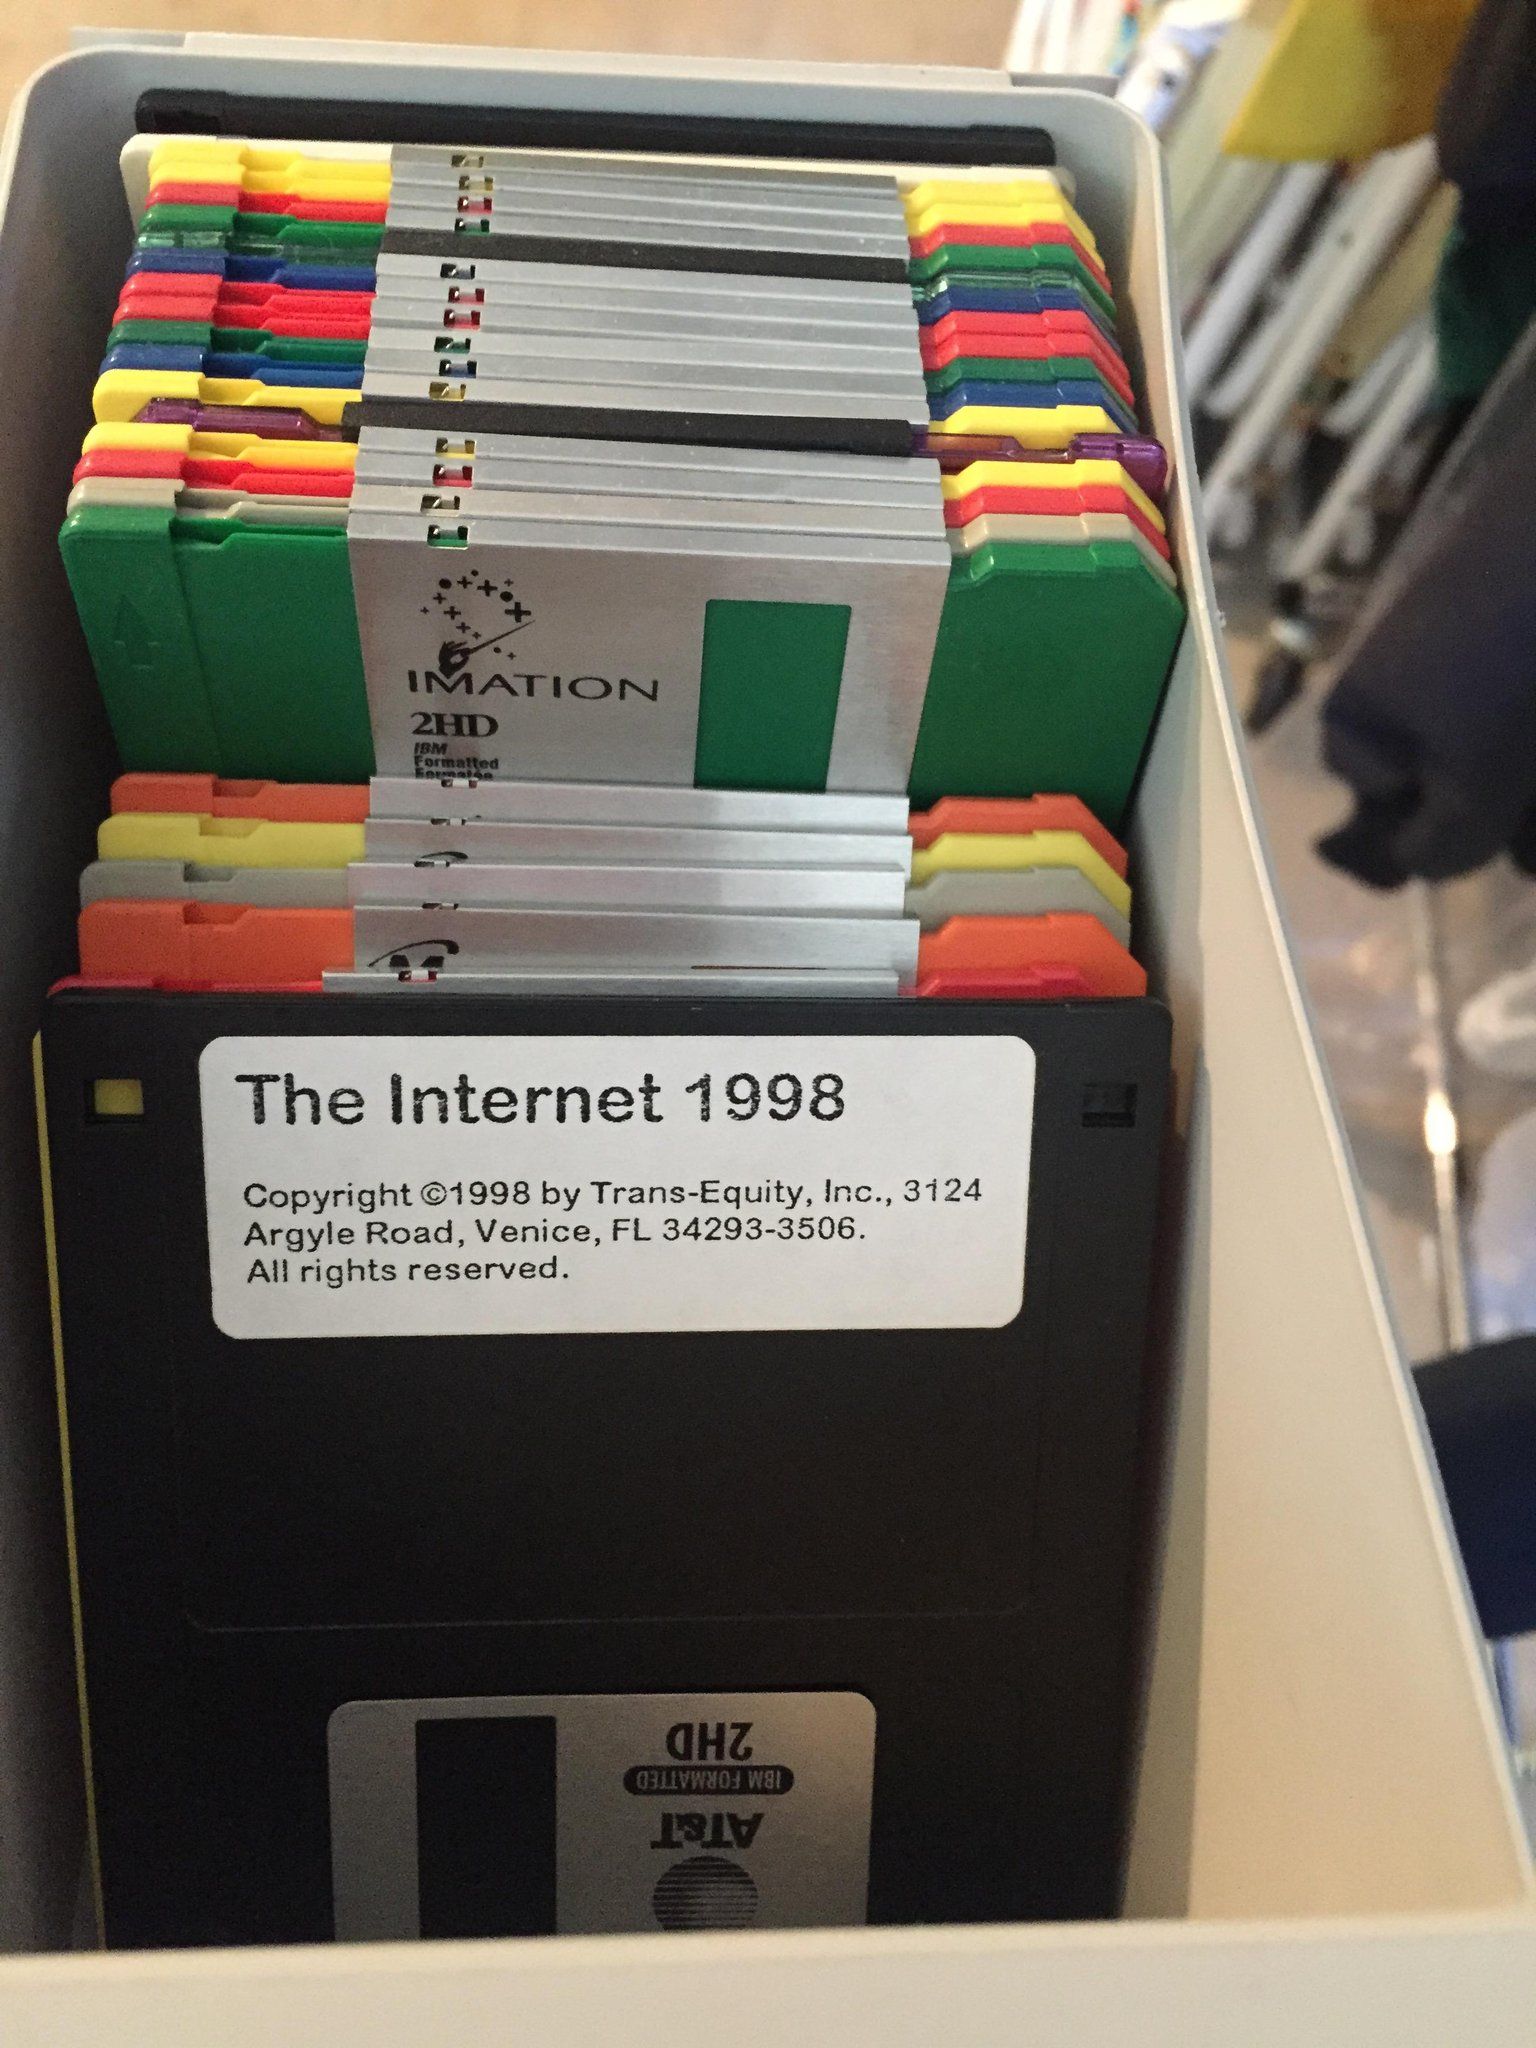 In 1998 you could fit the whole internet on one floppy disk.